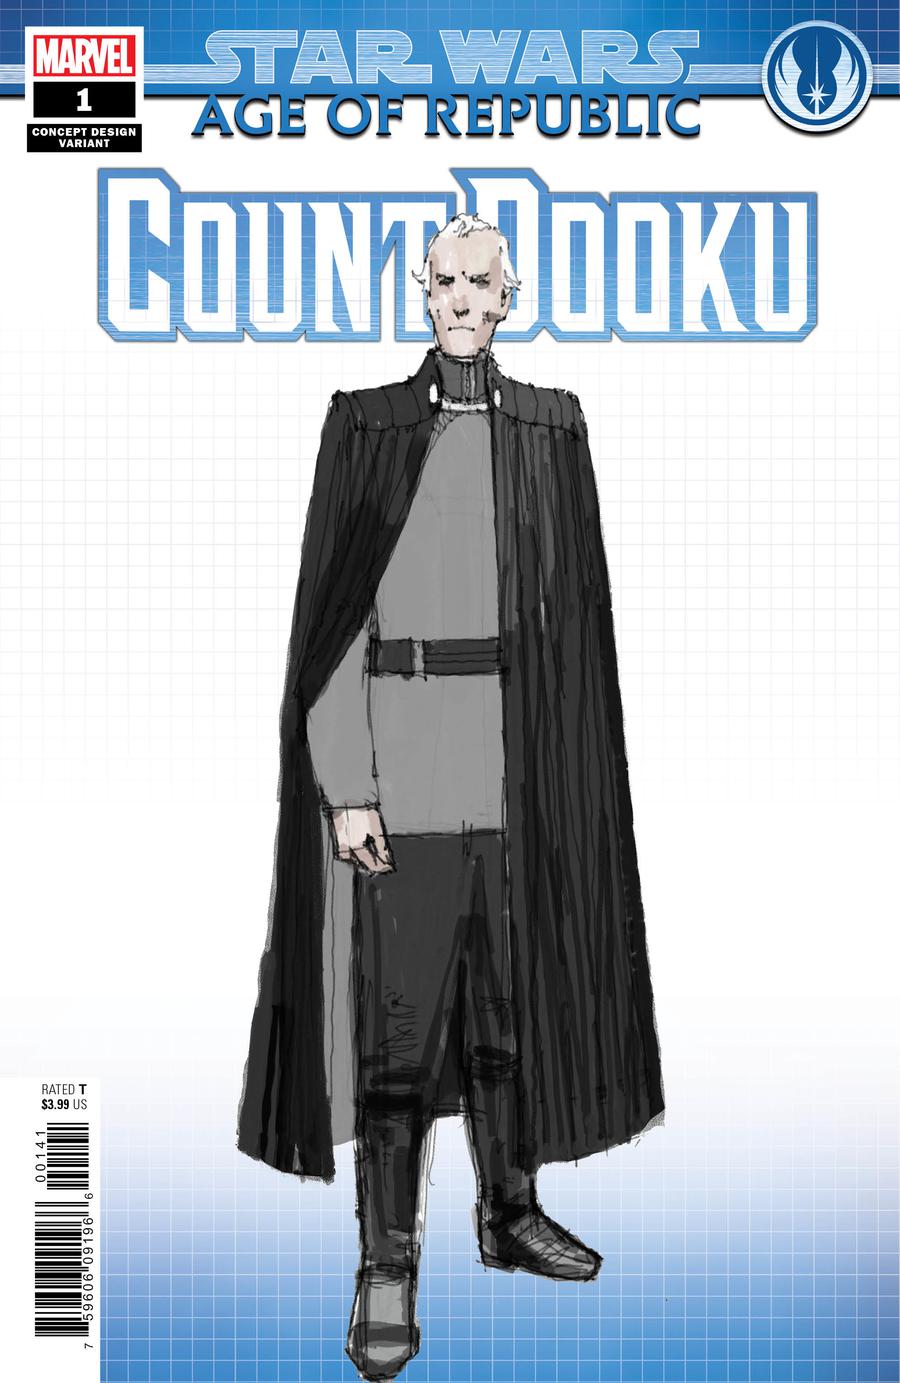 Star Wars Age of Republic: Count Dooku #1 Variant Edition (Concept Design) [2019]